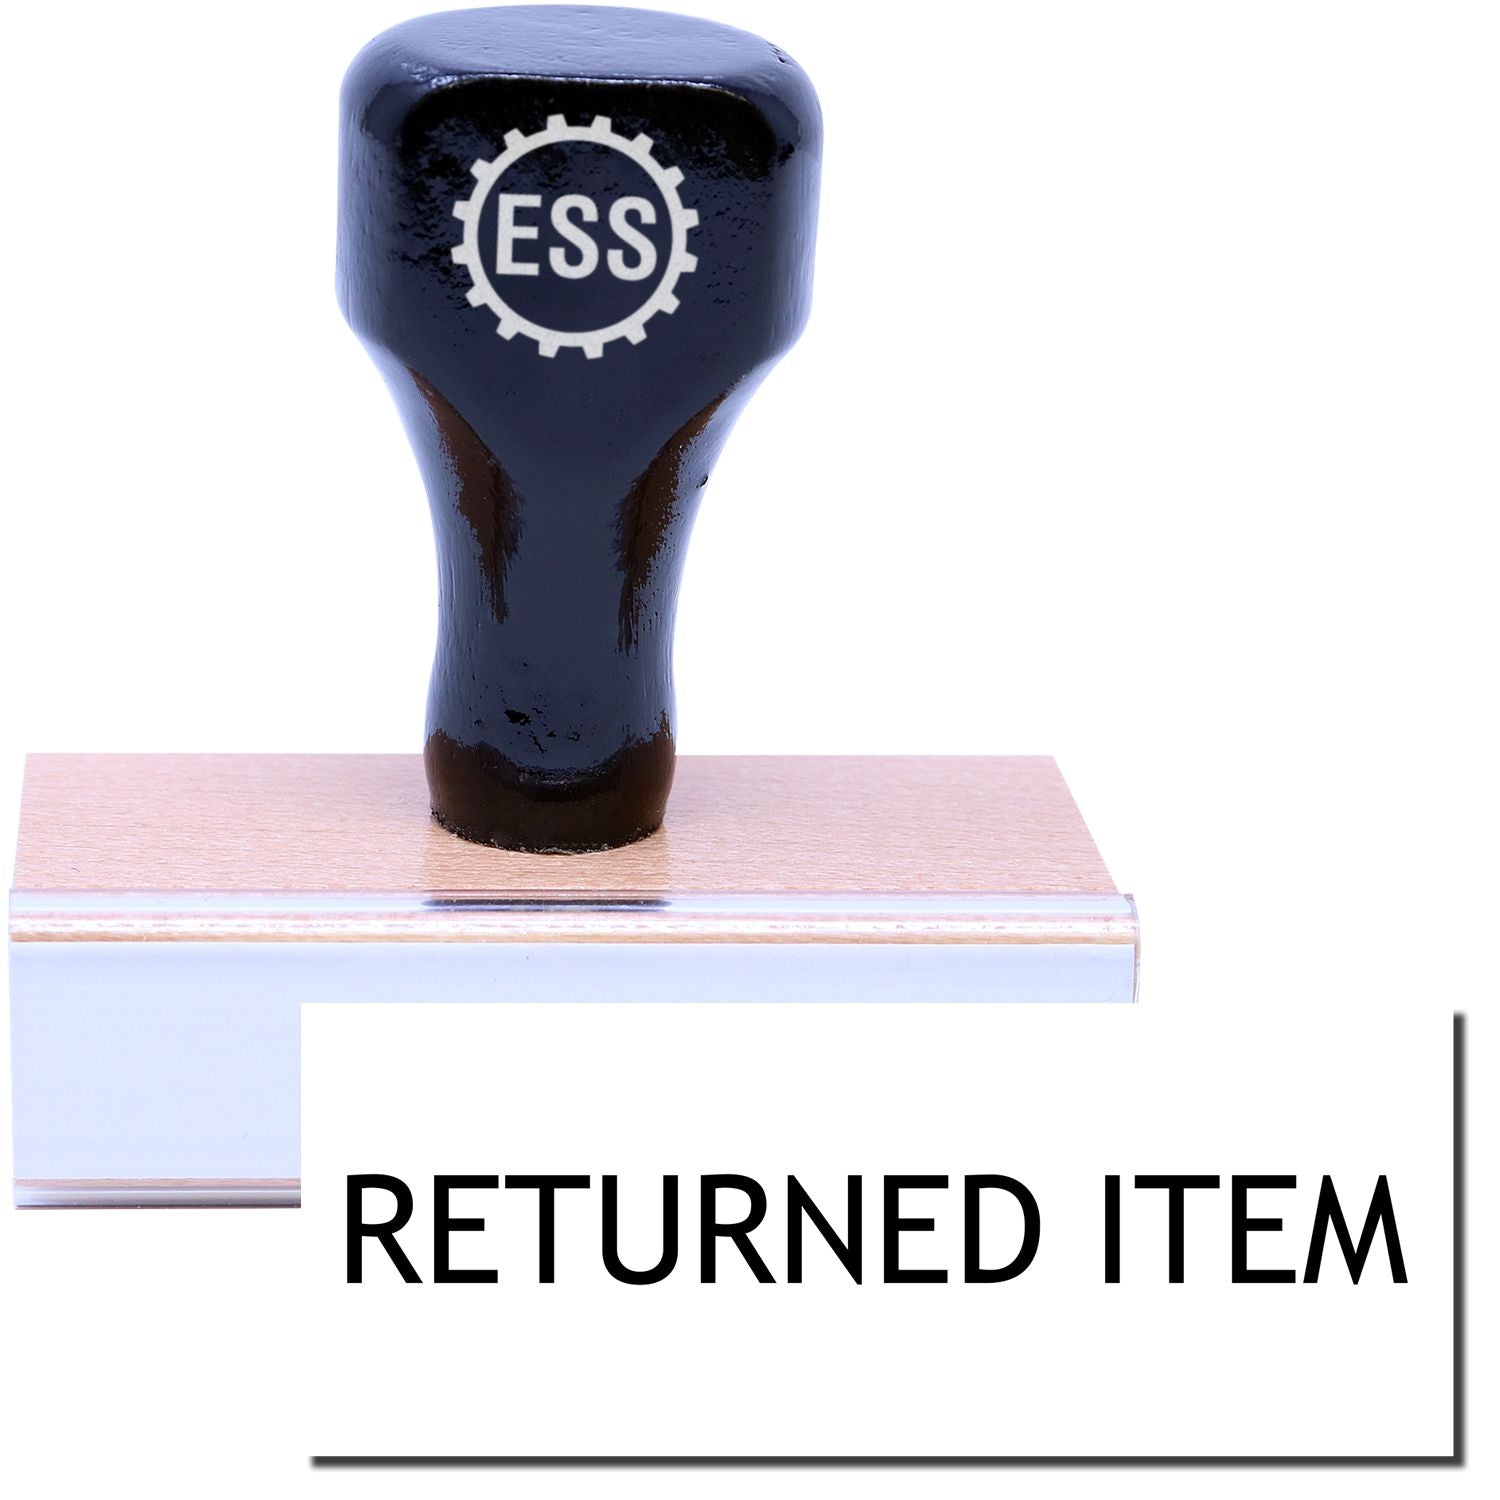 A stock office rubber stamp with a stamped image showing how the text "RETURNED ITEM" in a large font is displayed after stamping.